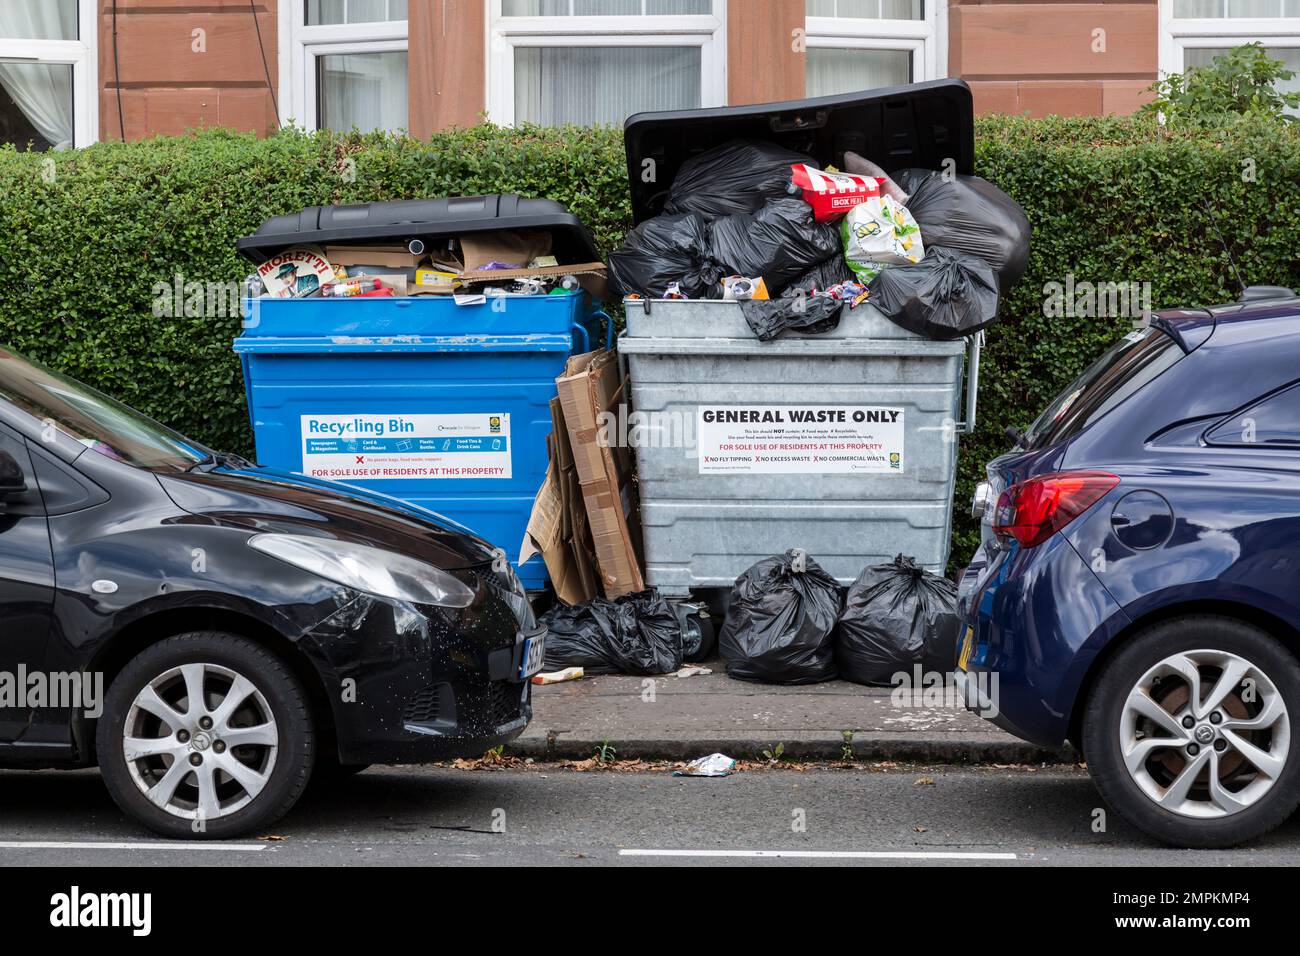 Overflowing domestic rubbish bin and black plastic bags on a pavement waiting to be cleared, Glasgow, Scotland, UK, Europe Stock Photo